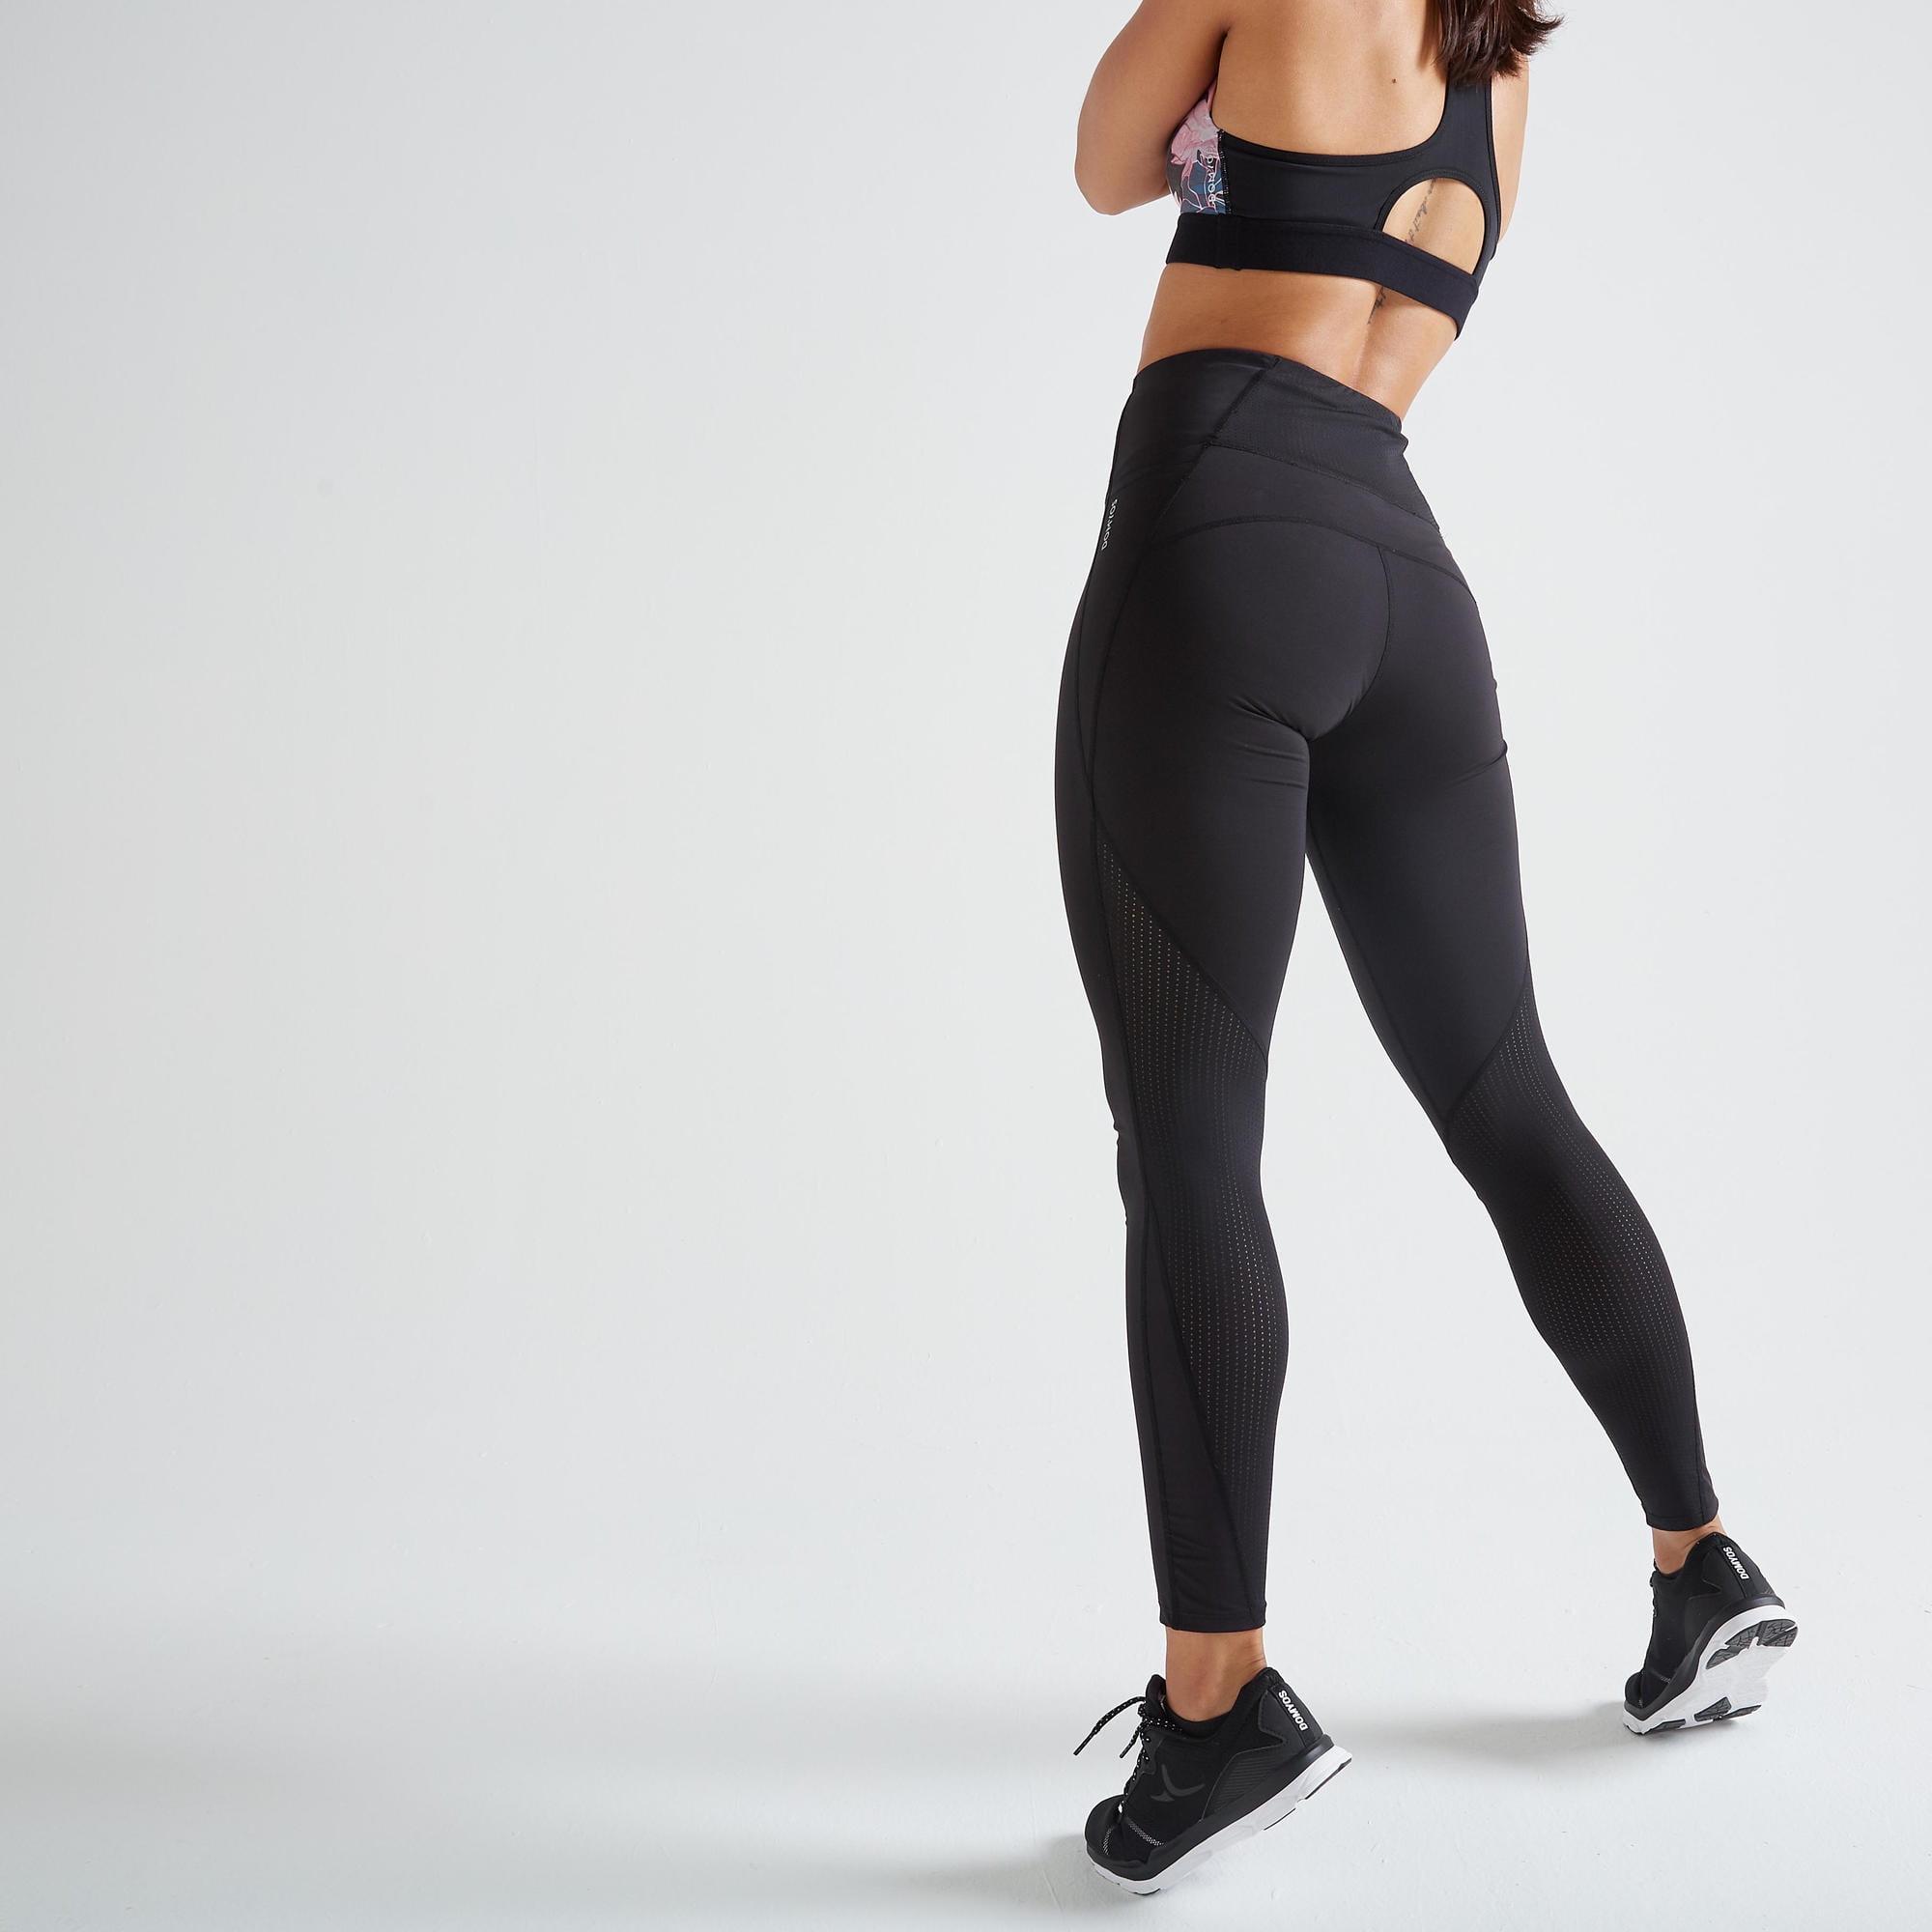 NYAMBA by Decathlon Solid Women Grey Track Pants - Buy NYAMBA by Decathlon  Solid Women Grey Track Pants Online at Best Prices in India | Flipkart.com